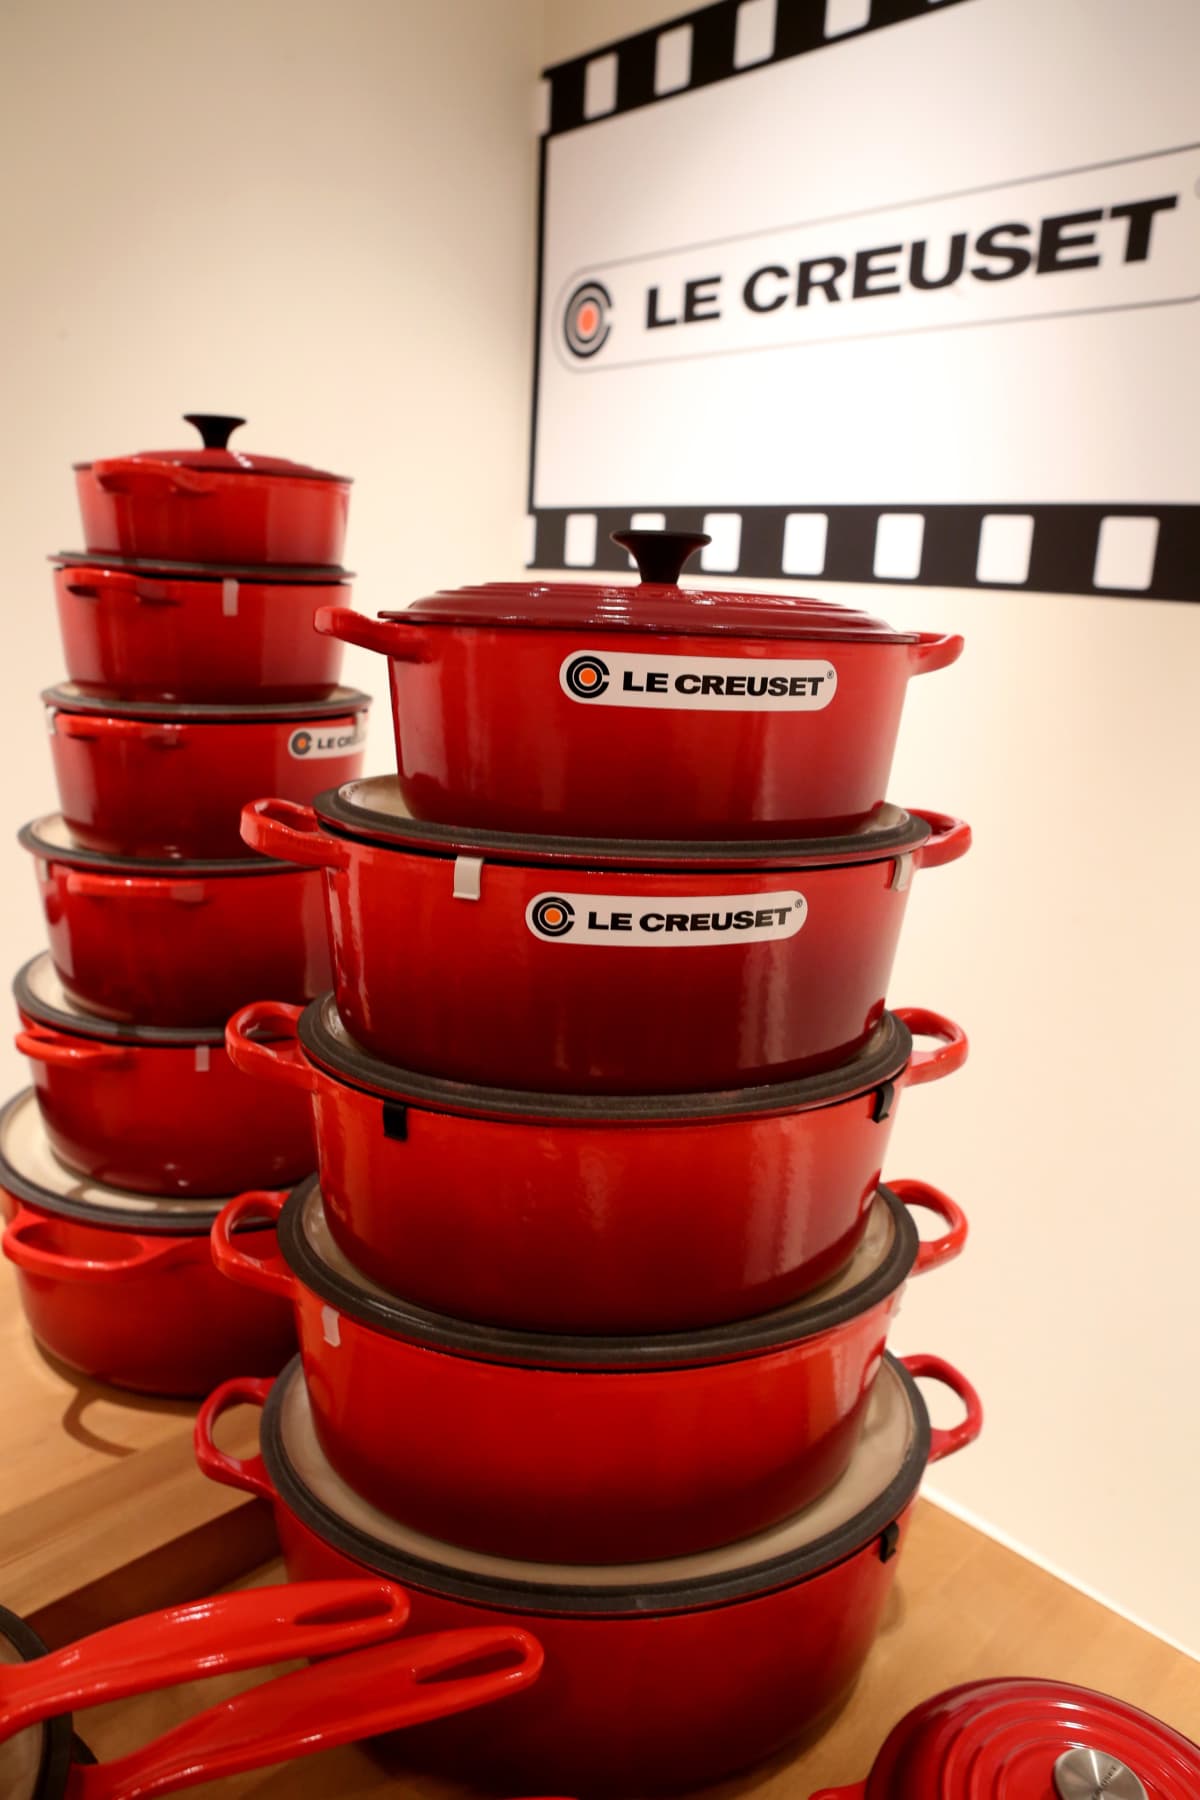 TO GO WITH AFP STORY BY PASCAL MALLET
French company Le Creuset's casserole dishes are pictured at the factory in Fresnoy-le-Grand, northeastern France, on September 17, 2013. AFP PHOTO / FRANCOIS NASCIMBENI        (Photo credit should read FRANCOIS NASCIMBENI/AFP via Getty Images)